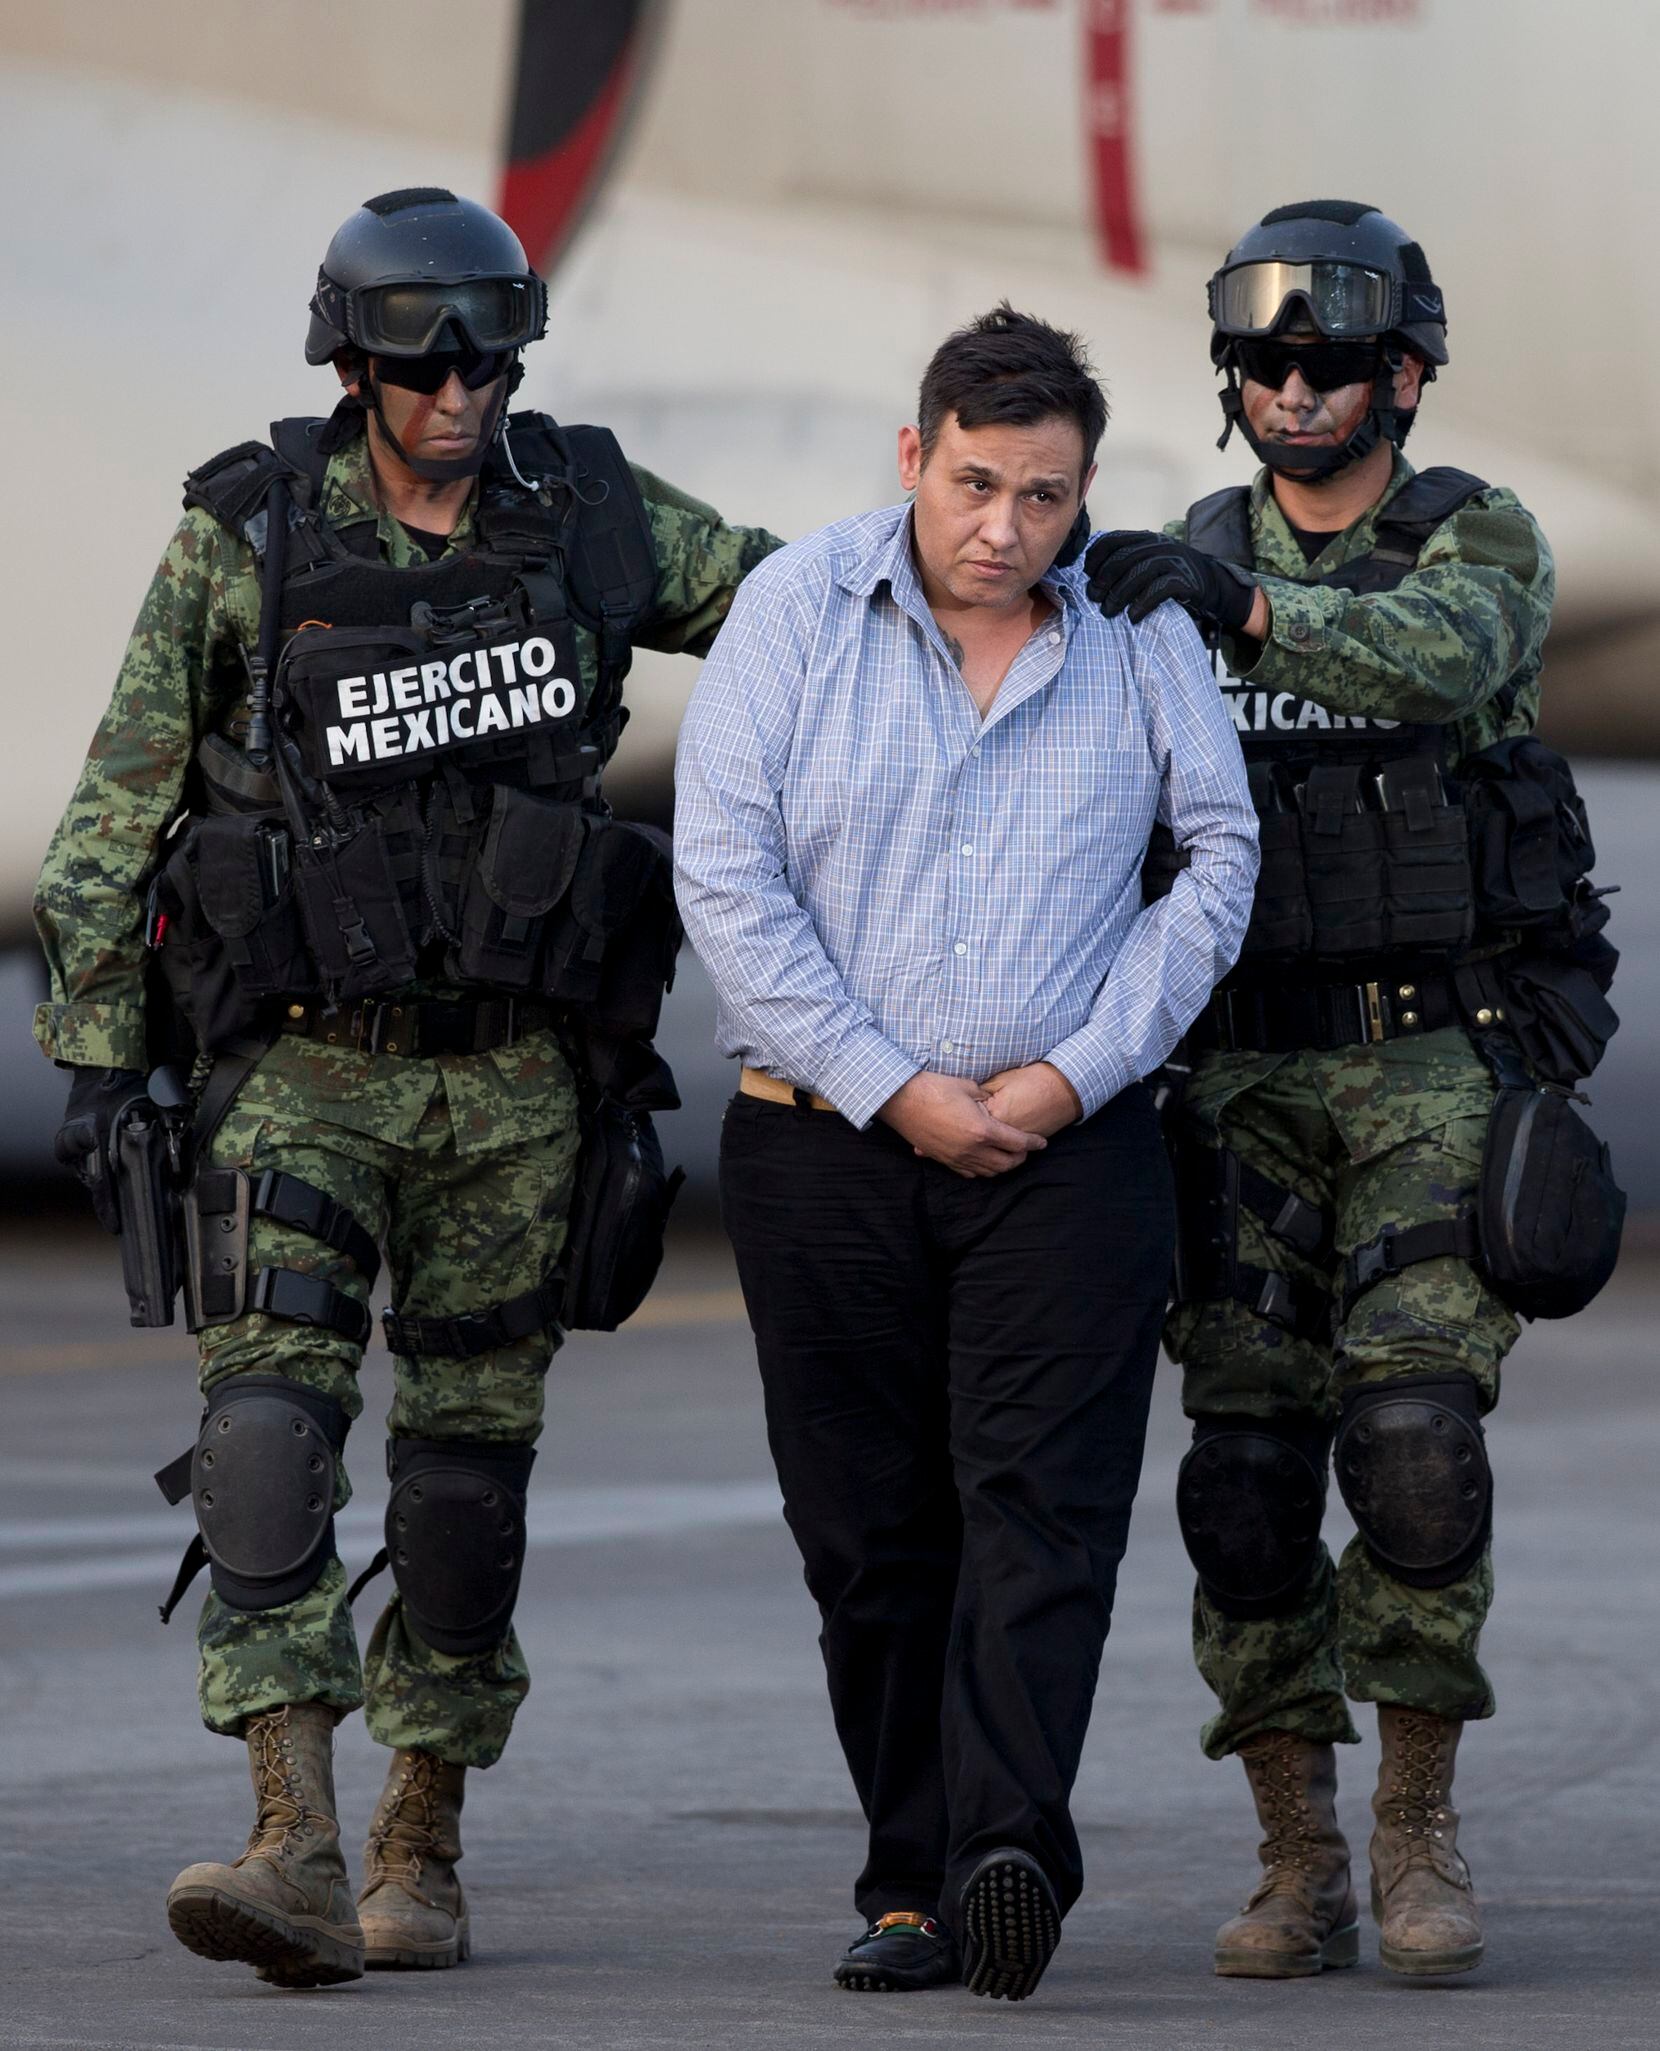 Soldiers escorted Omar Trevino Morales, leader of the Zetas drug cartel, as he was moved from a military plane to a military vehicle in Mexico City on March 4, 2015.